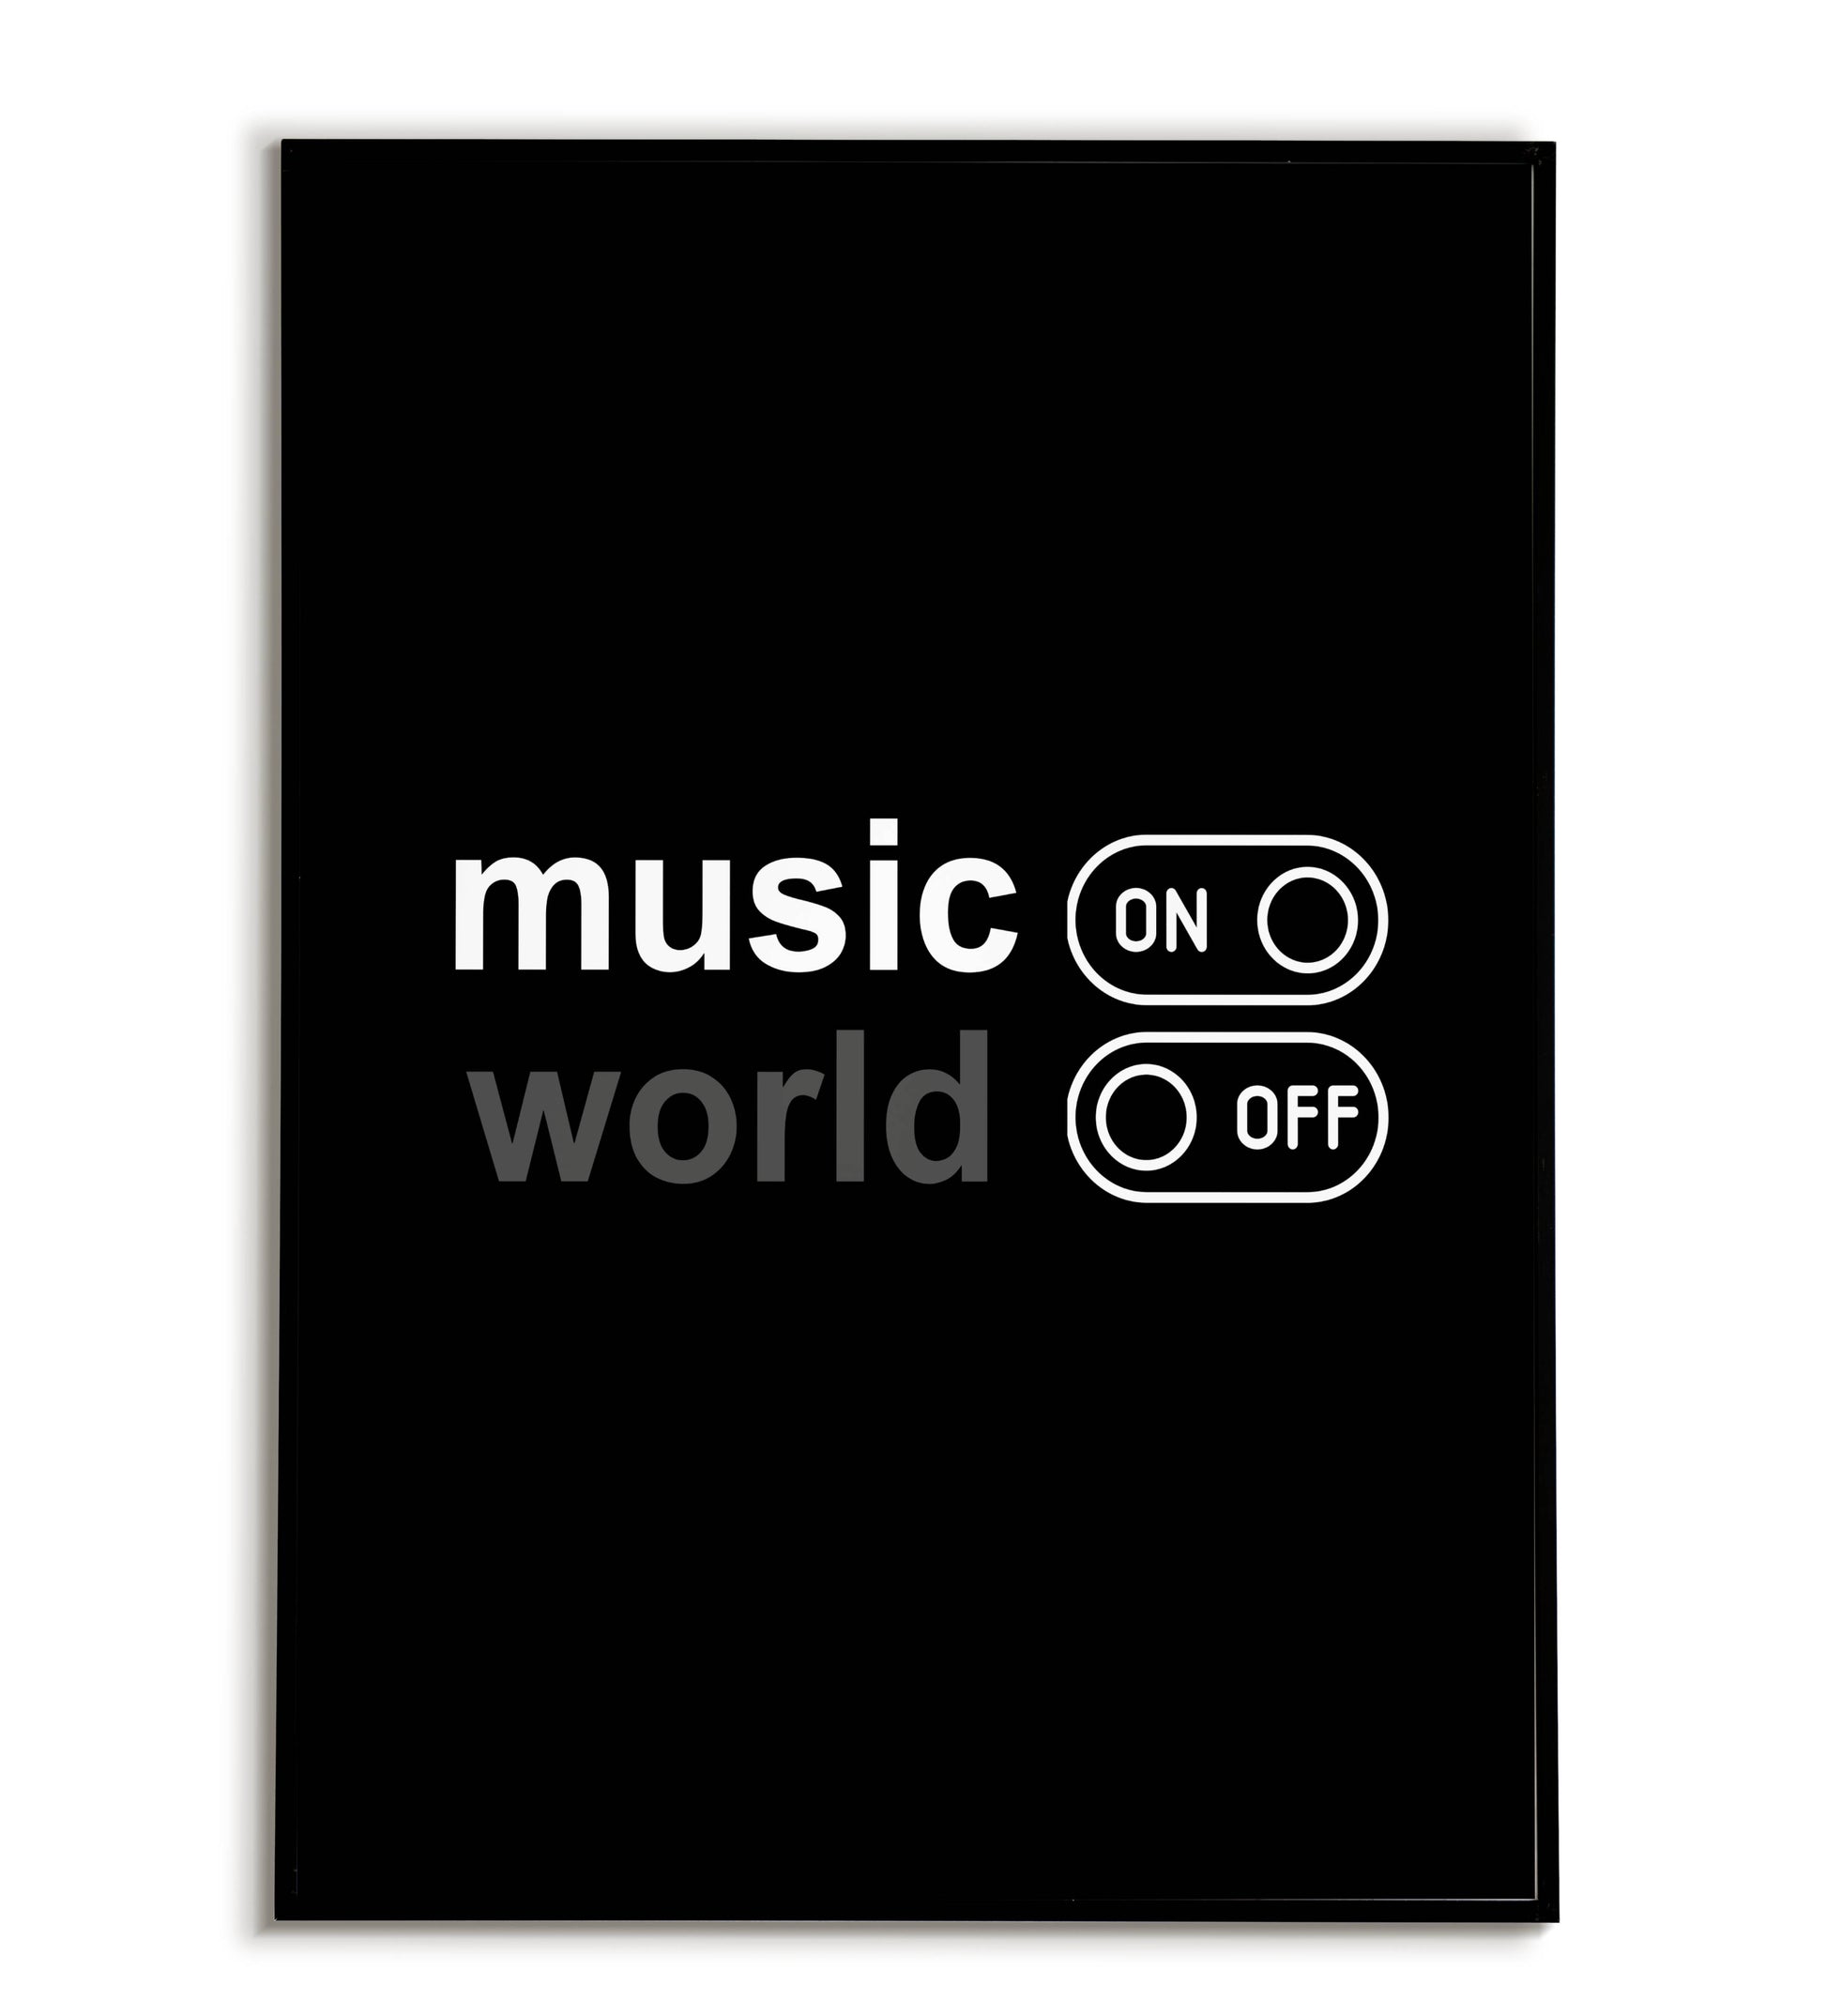 "Music ON World OFF" - Printable Wall Art / Poster. Download this design to express your love for music.